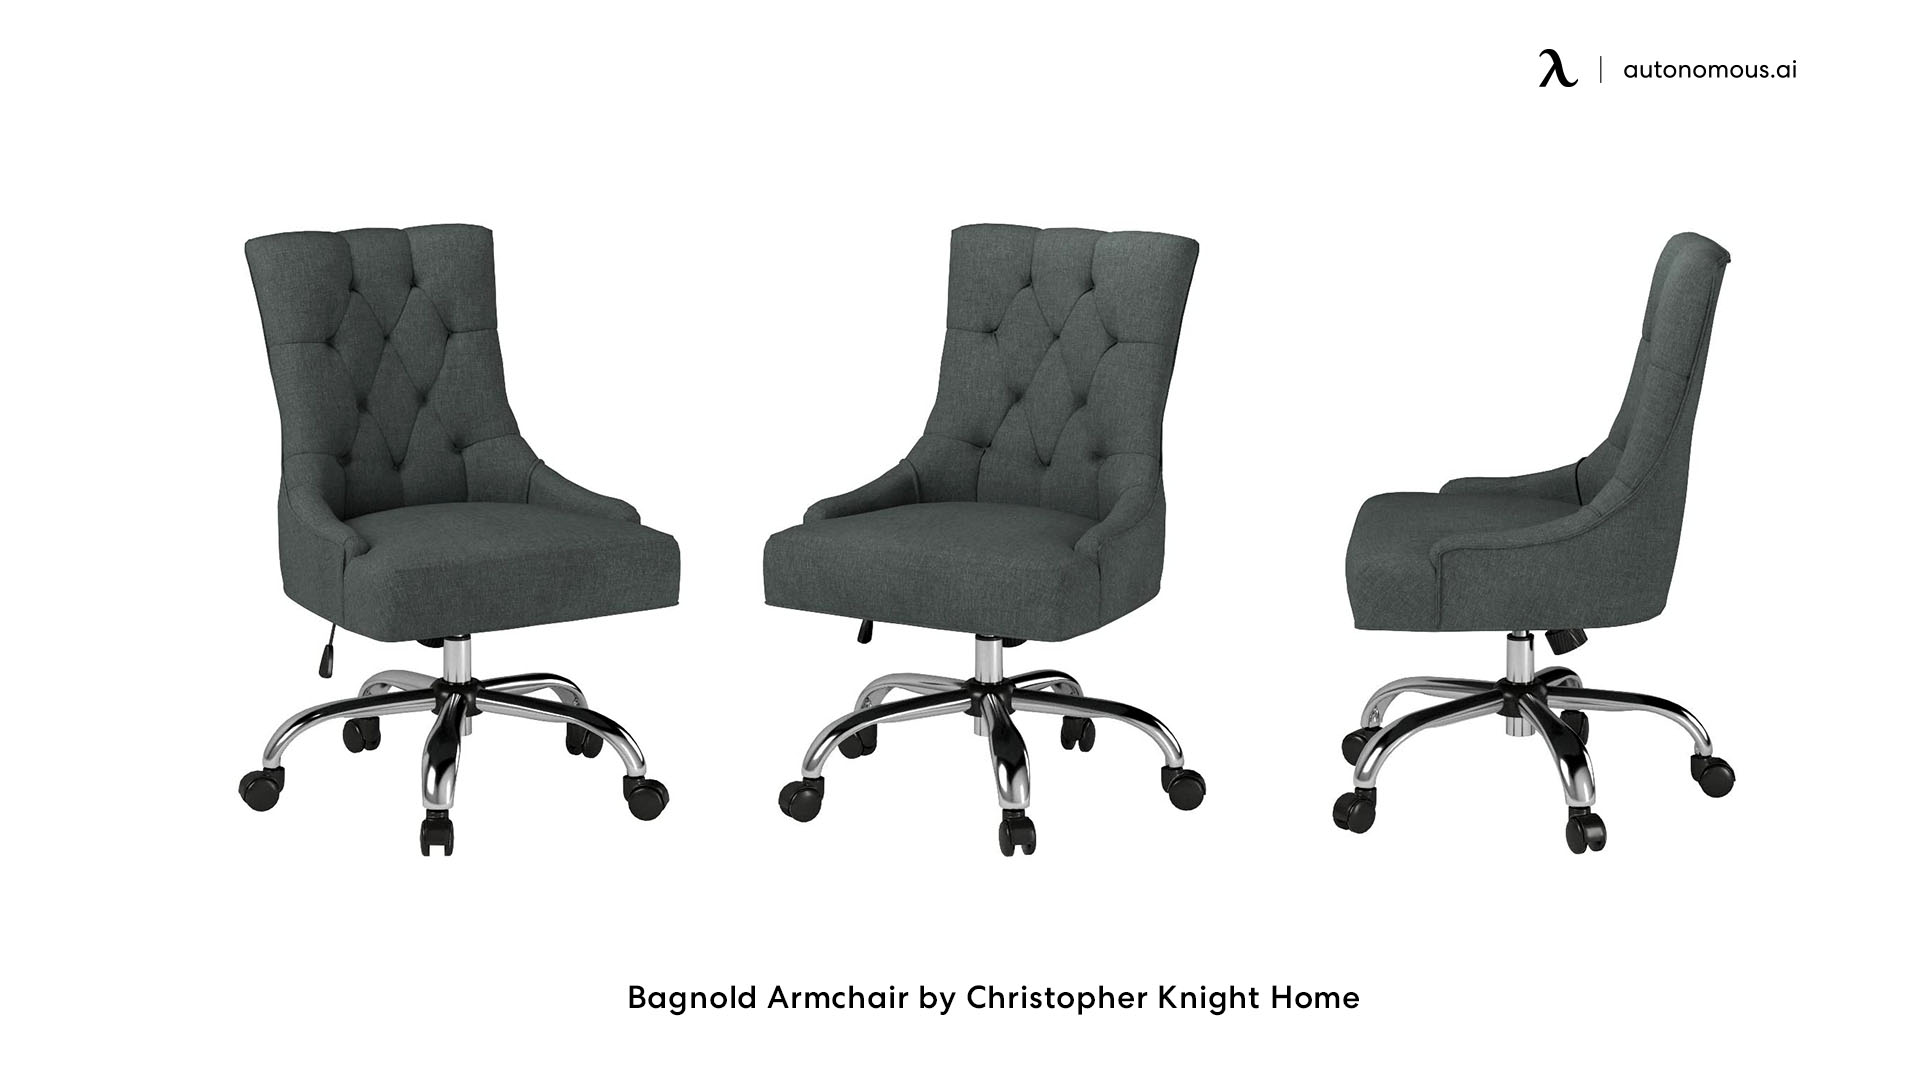 Bagnold Armchair by Christopher Knight Home